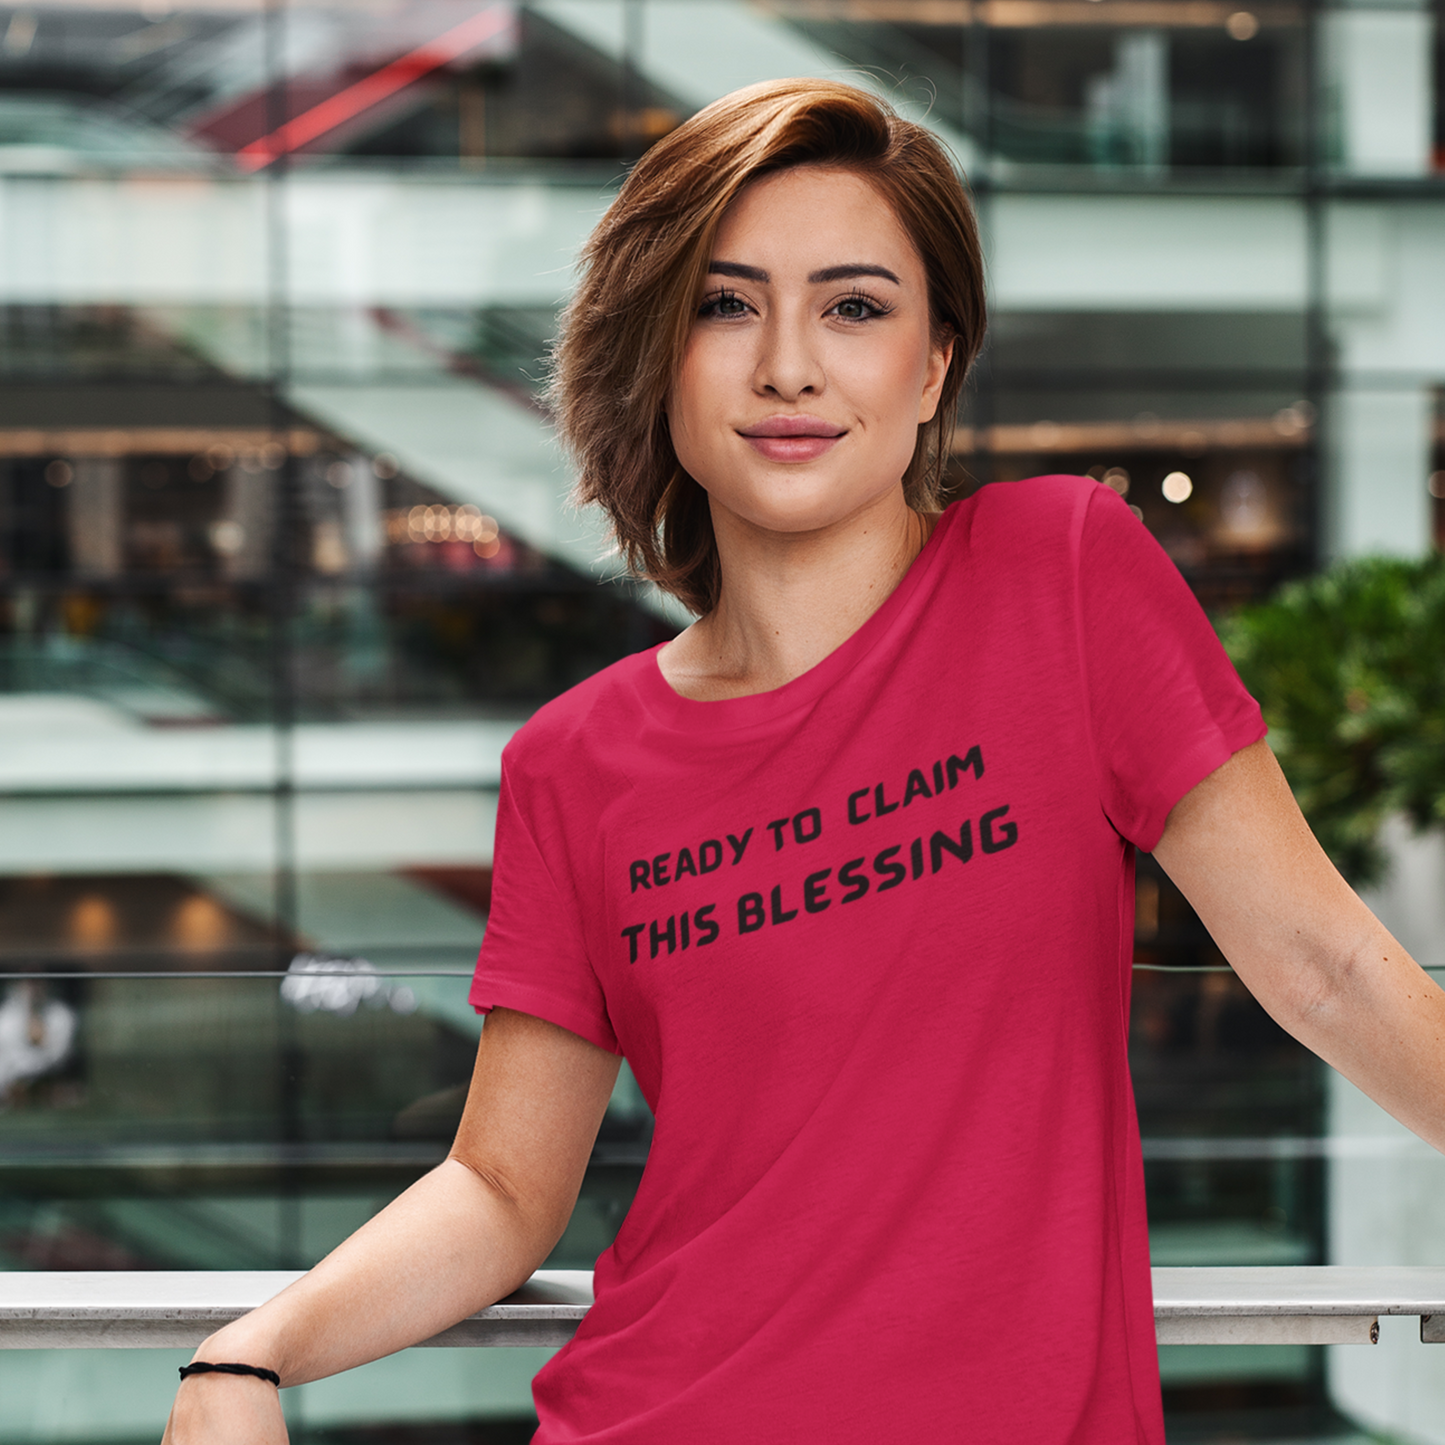 READY TO CLAIM THIS BLESSINF UNISEX INSPIRATIONAL WORDS T SHIRT